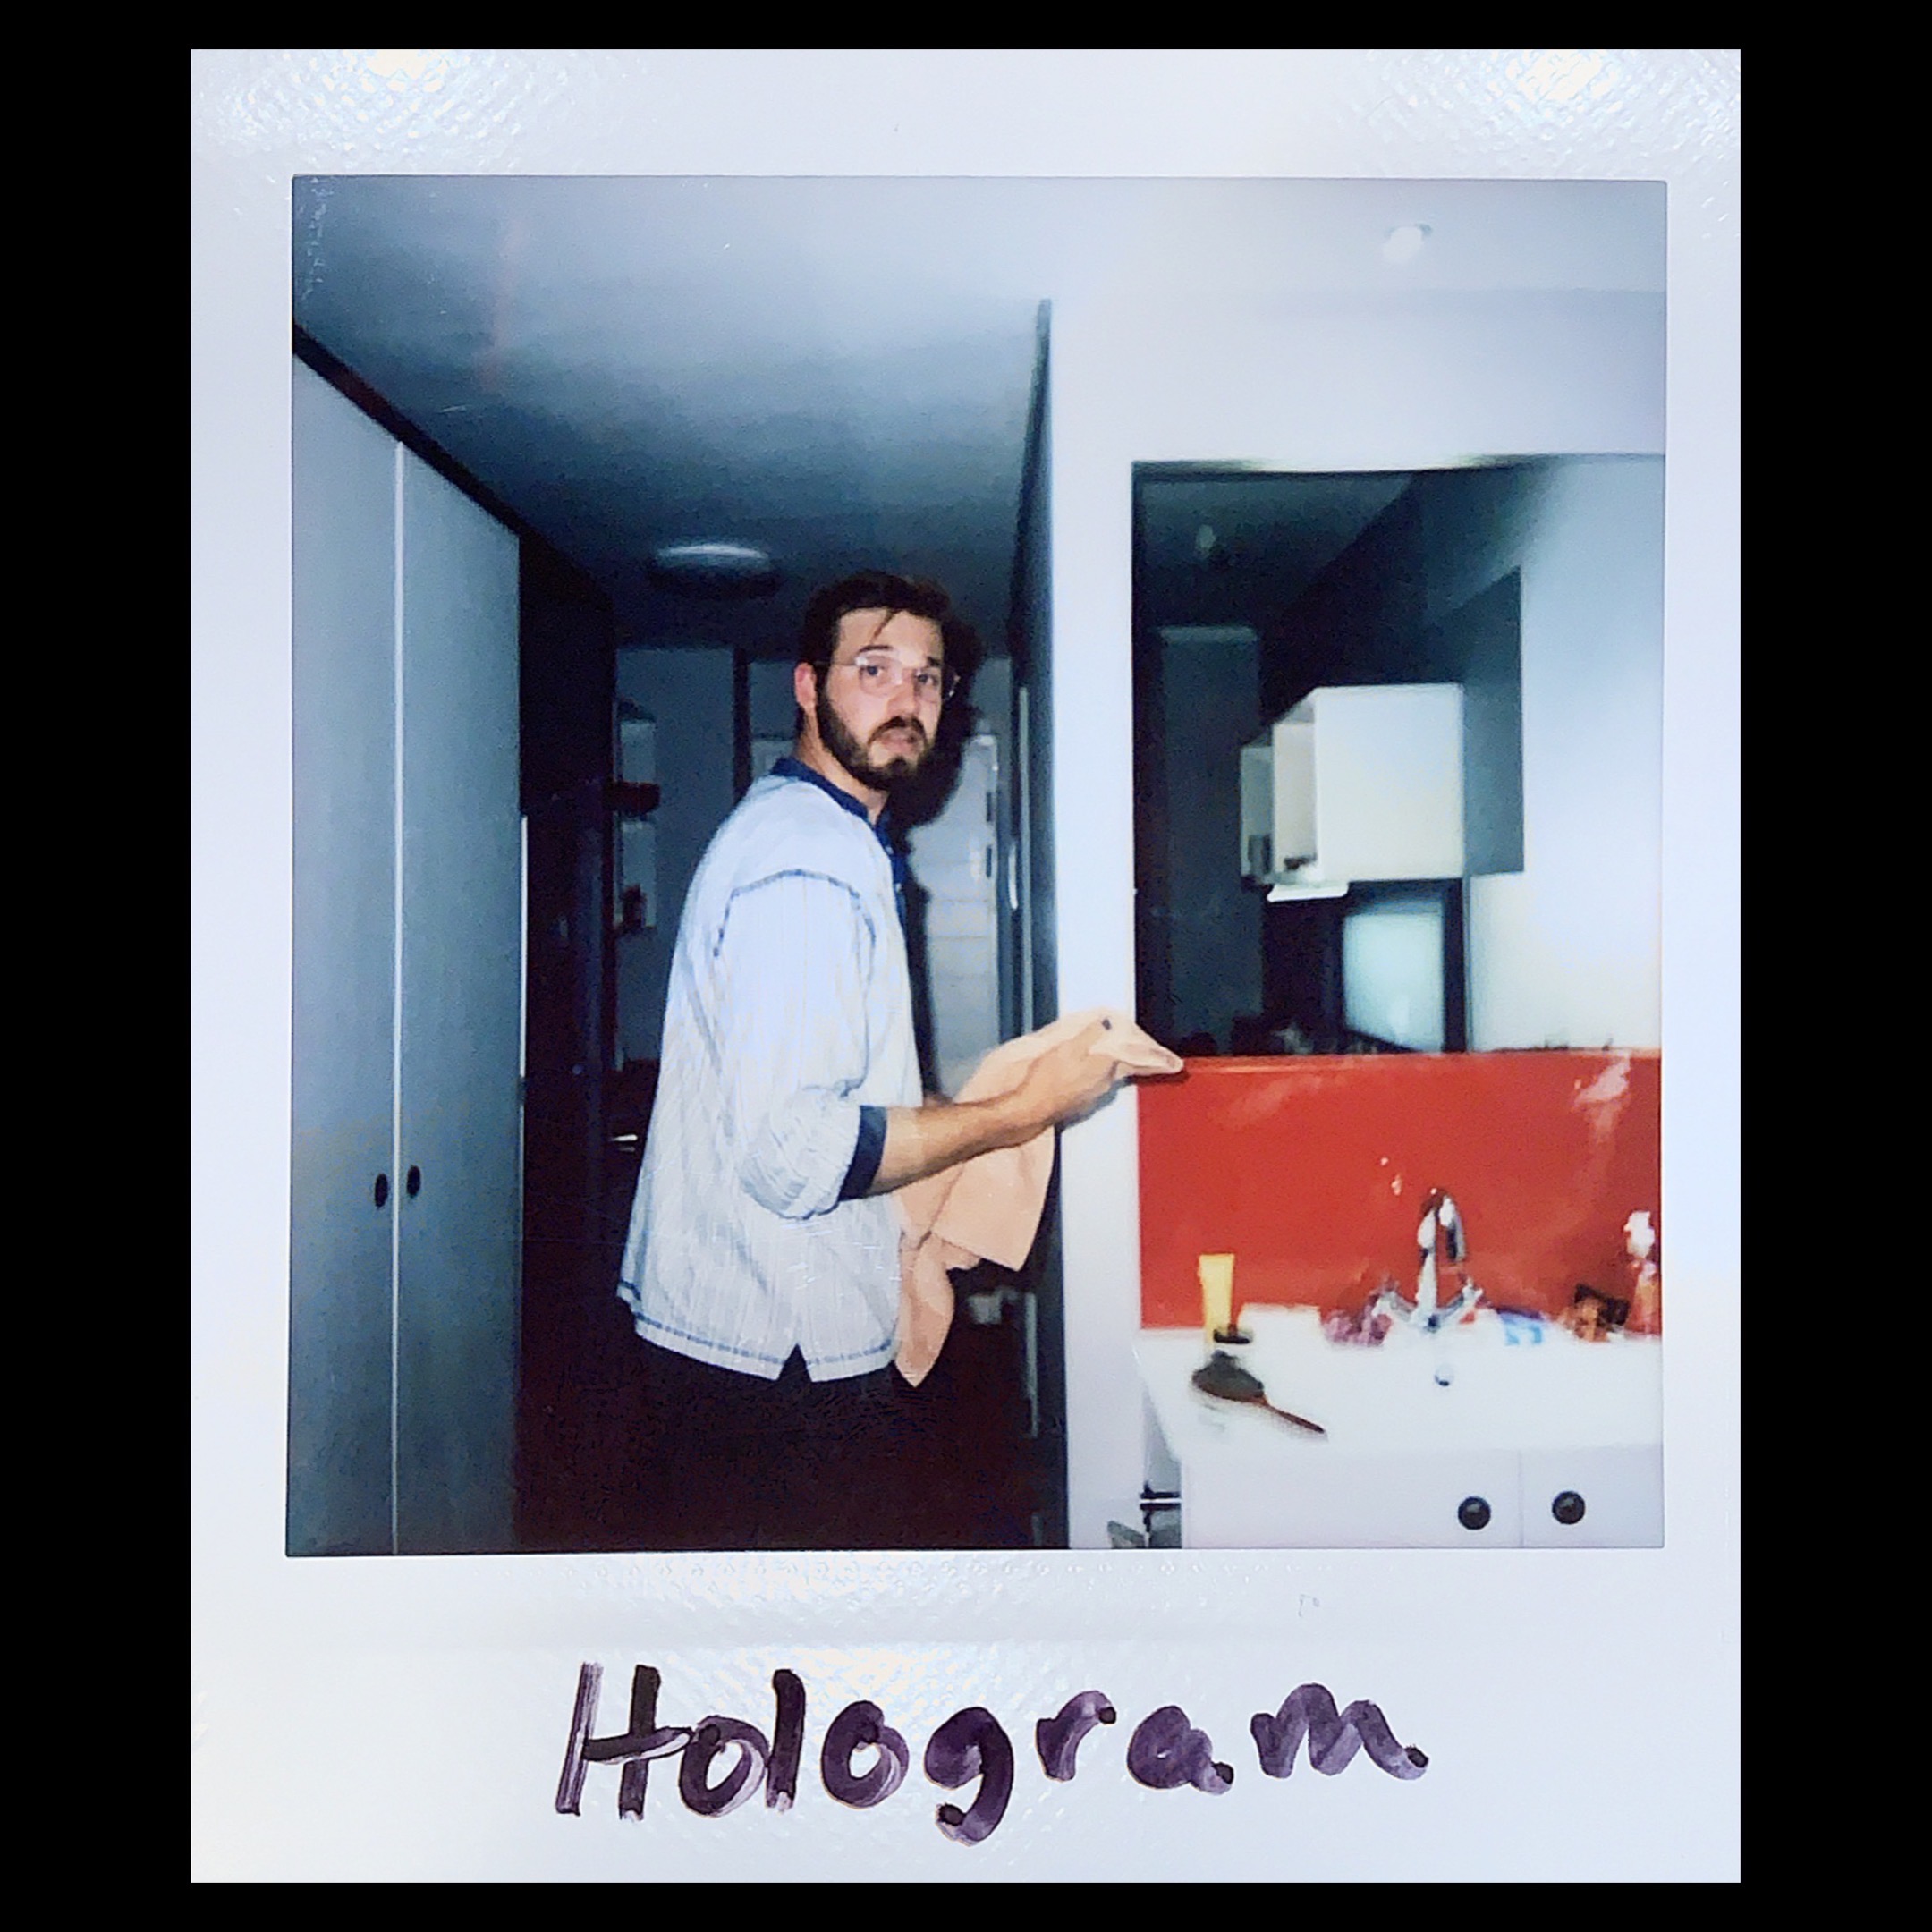 "Hologram" by Ell